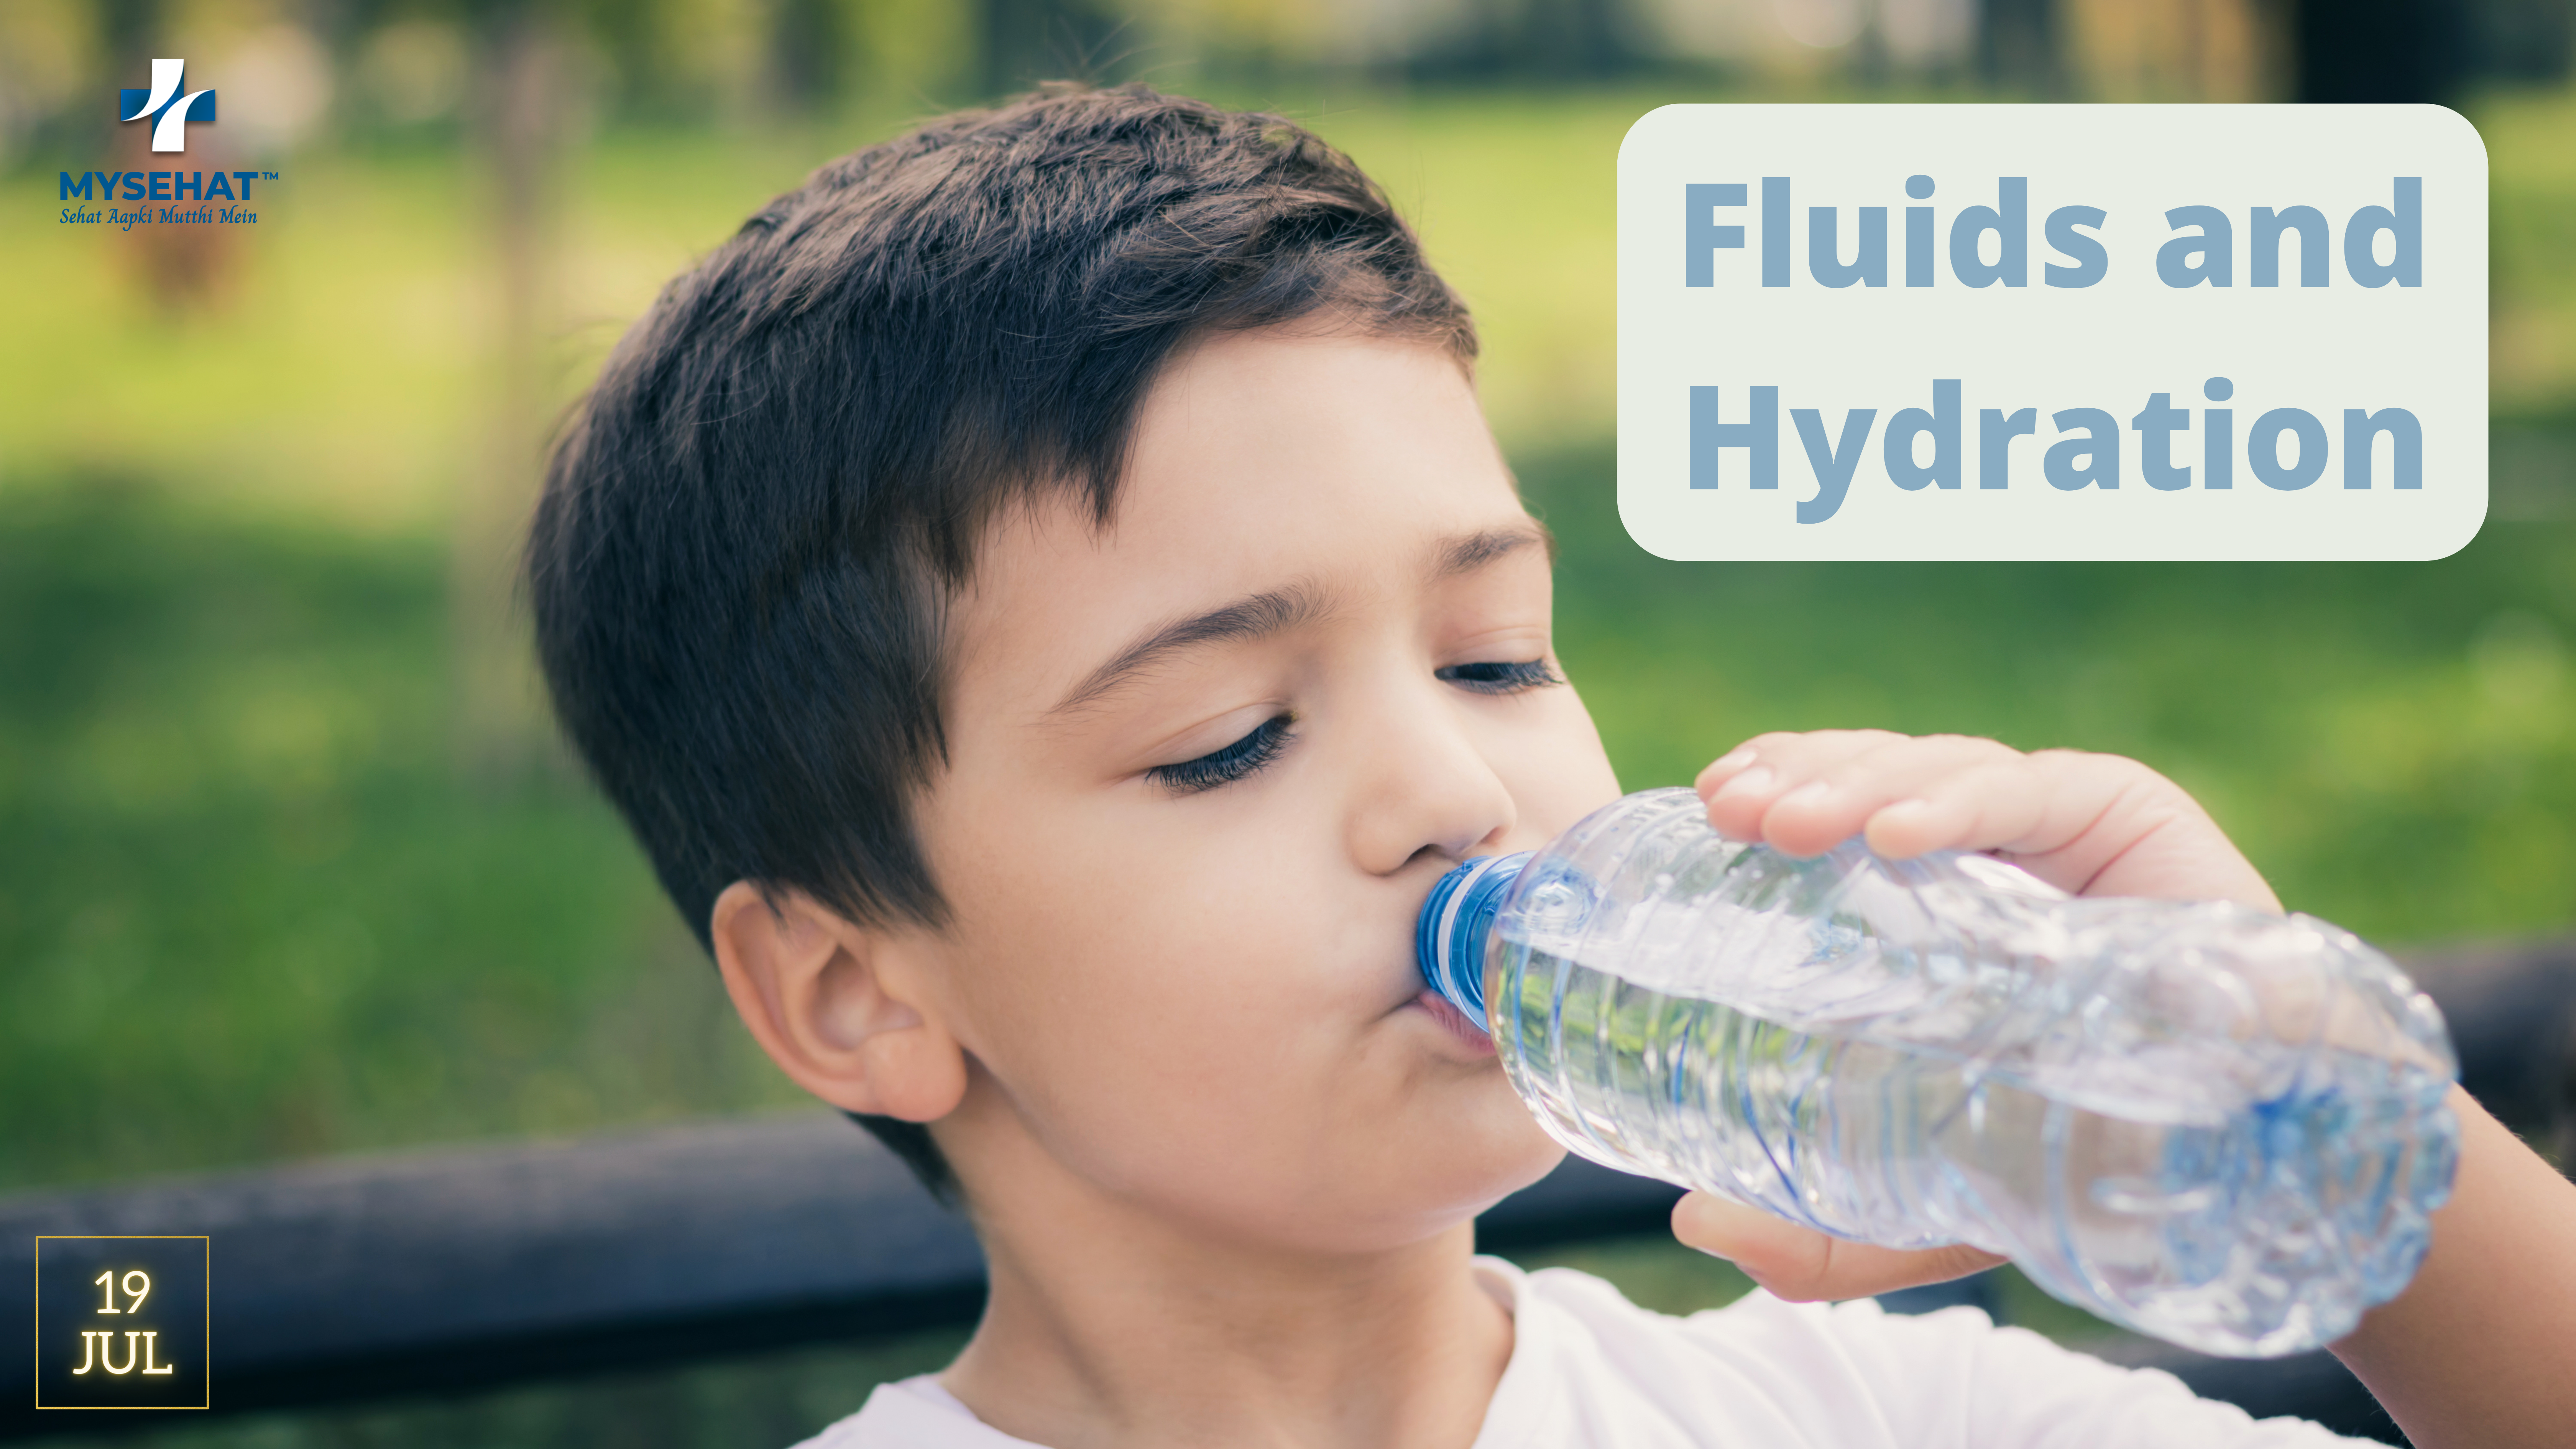 Fluids and Hydration